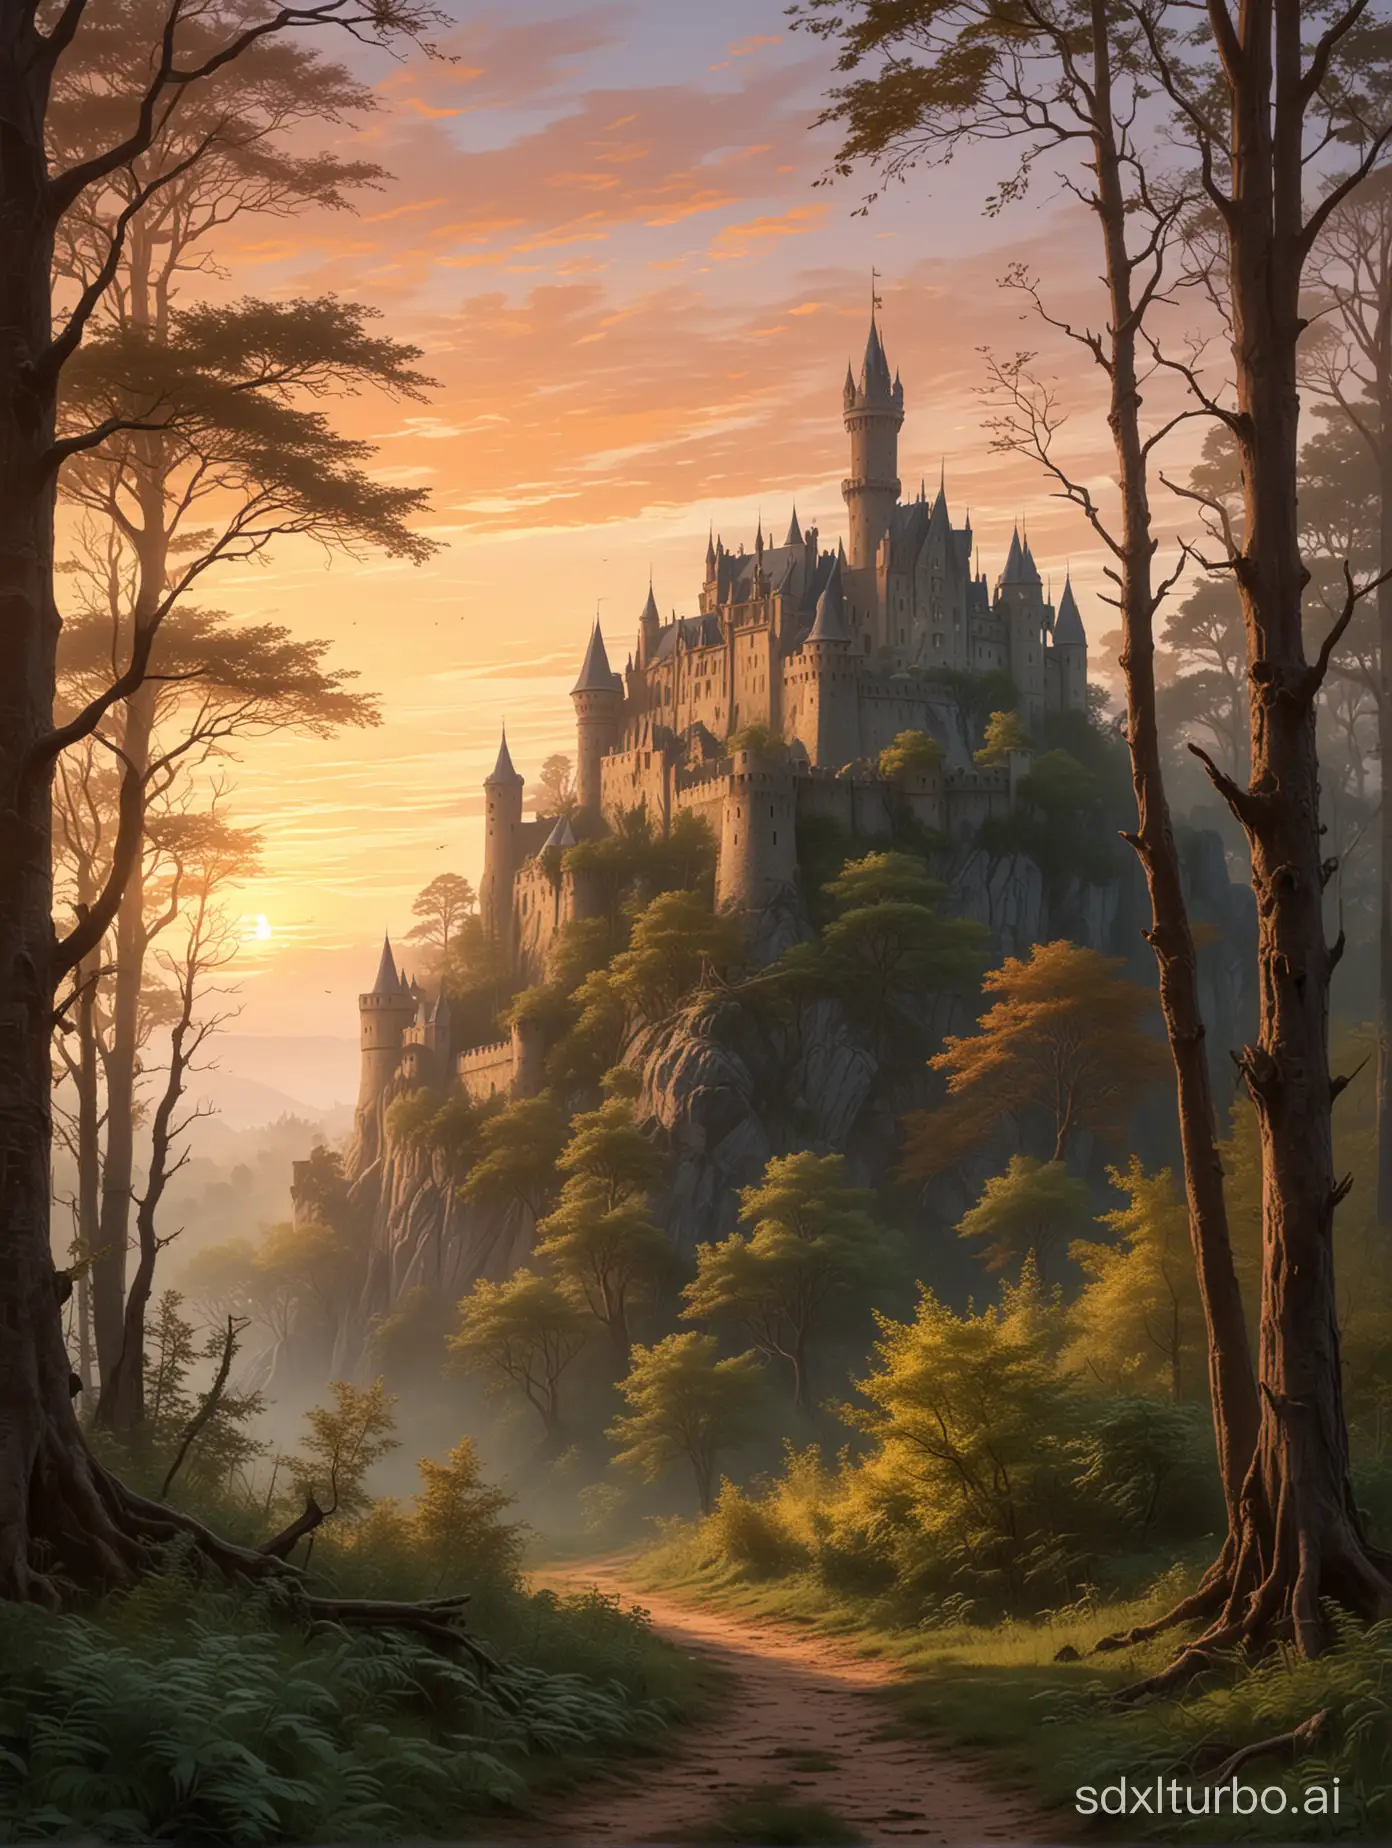 A mysterious forest at sunrise, with an ancient castle visible in the distance. The lighting is soft, with accents on the contours of the trees and the architecture of the castle. The style is digital painting, reminiscent of brushstrokes.